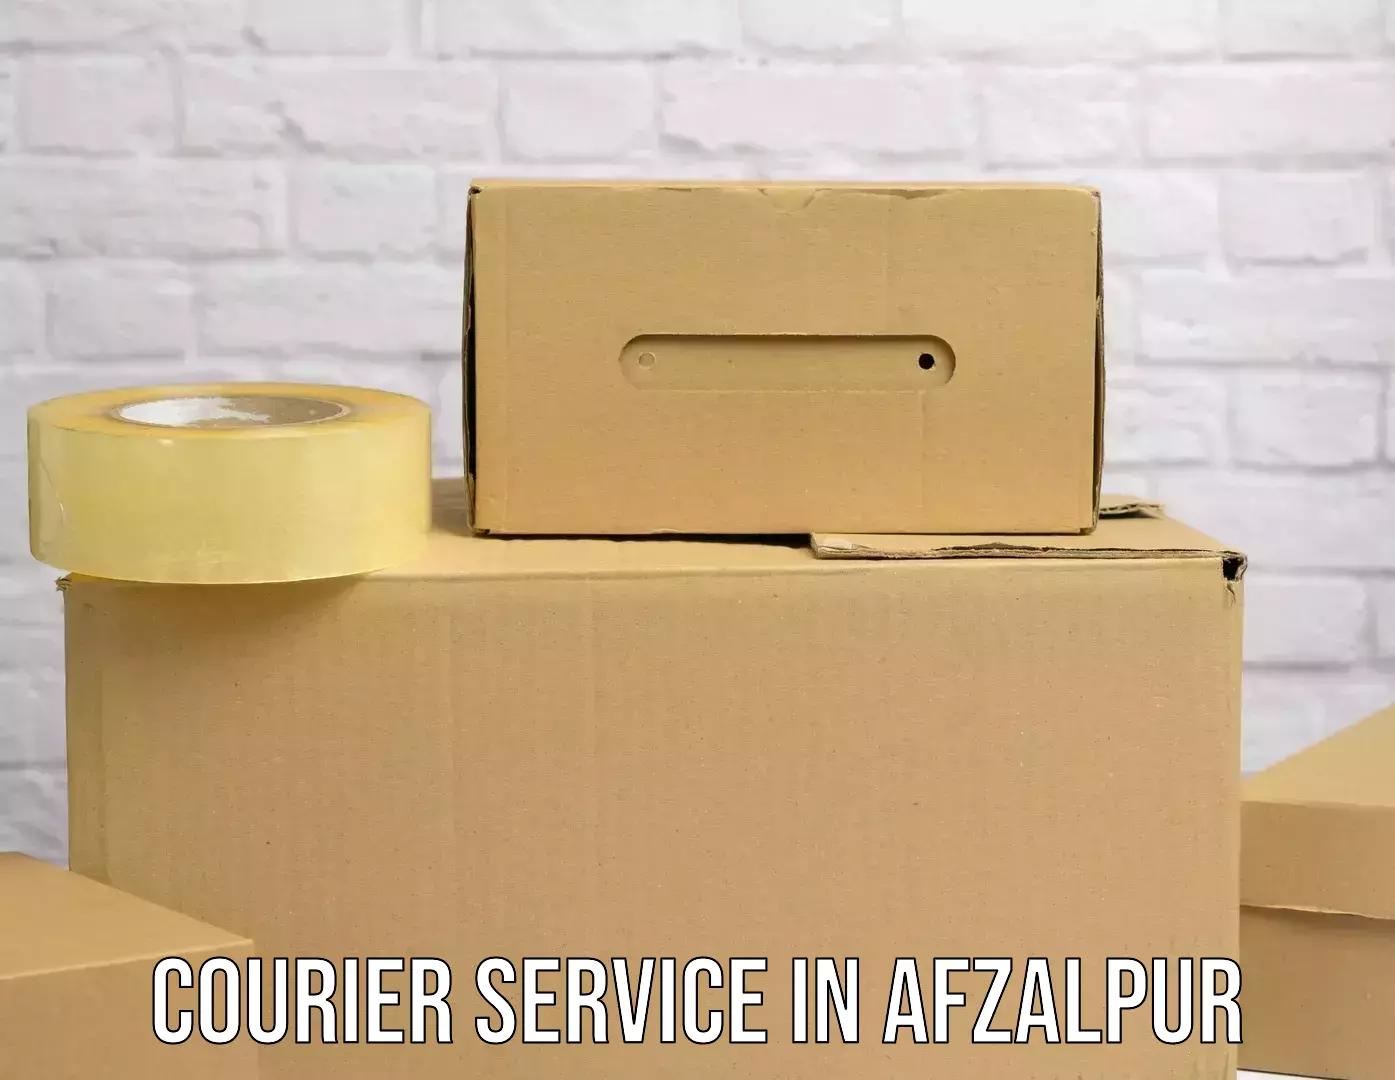 Flexible delivery scheduling in Afzalpur